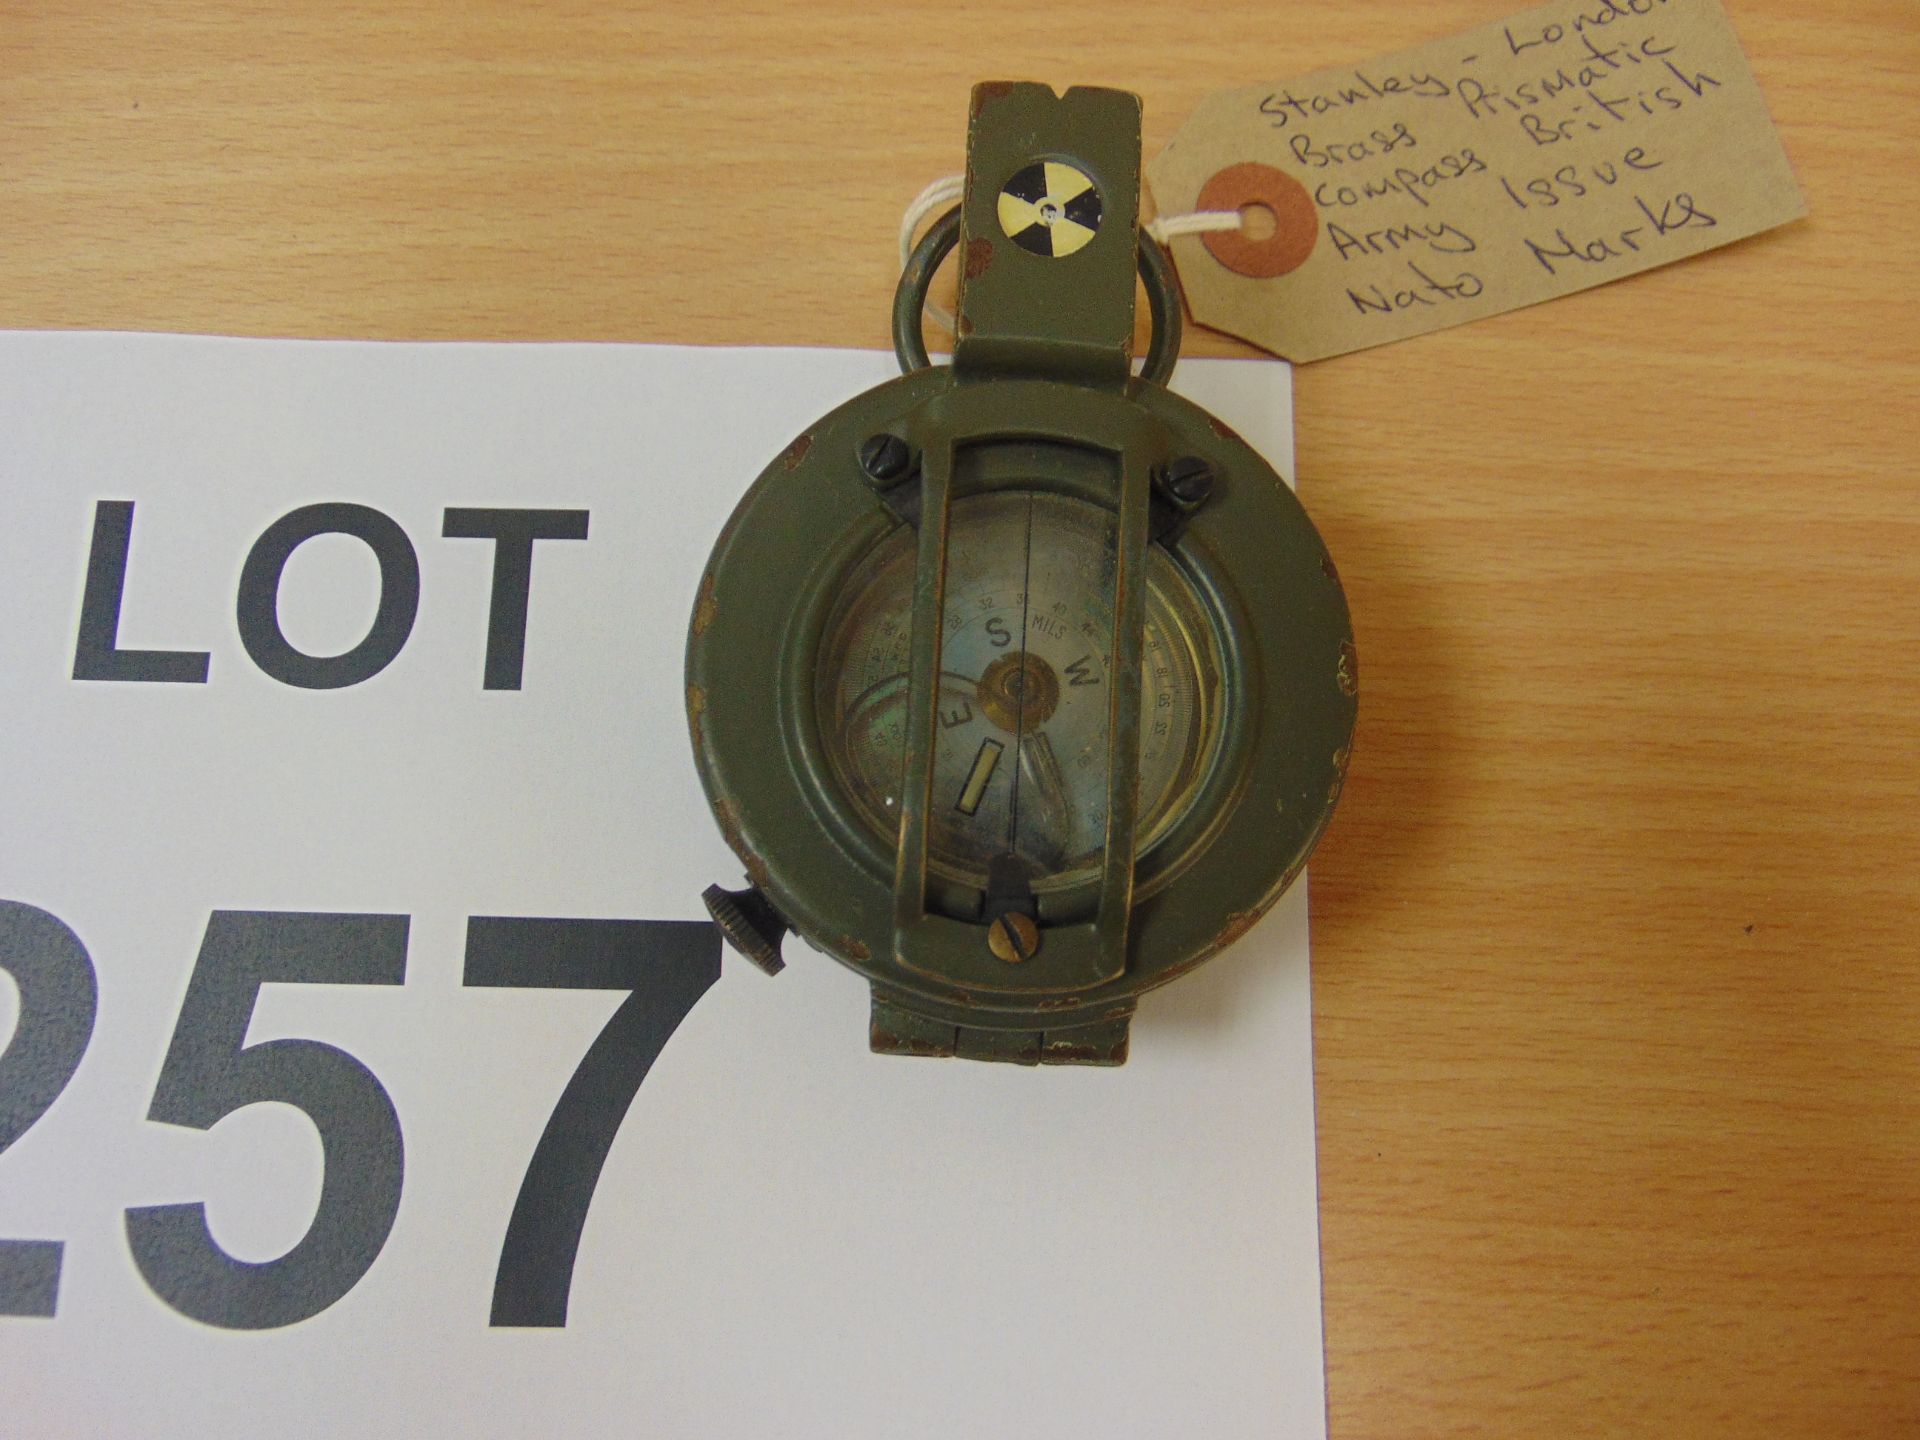 Stanley London Brass Prismatic Compass, British Army Issue Nato marks - Image 3 of 3